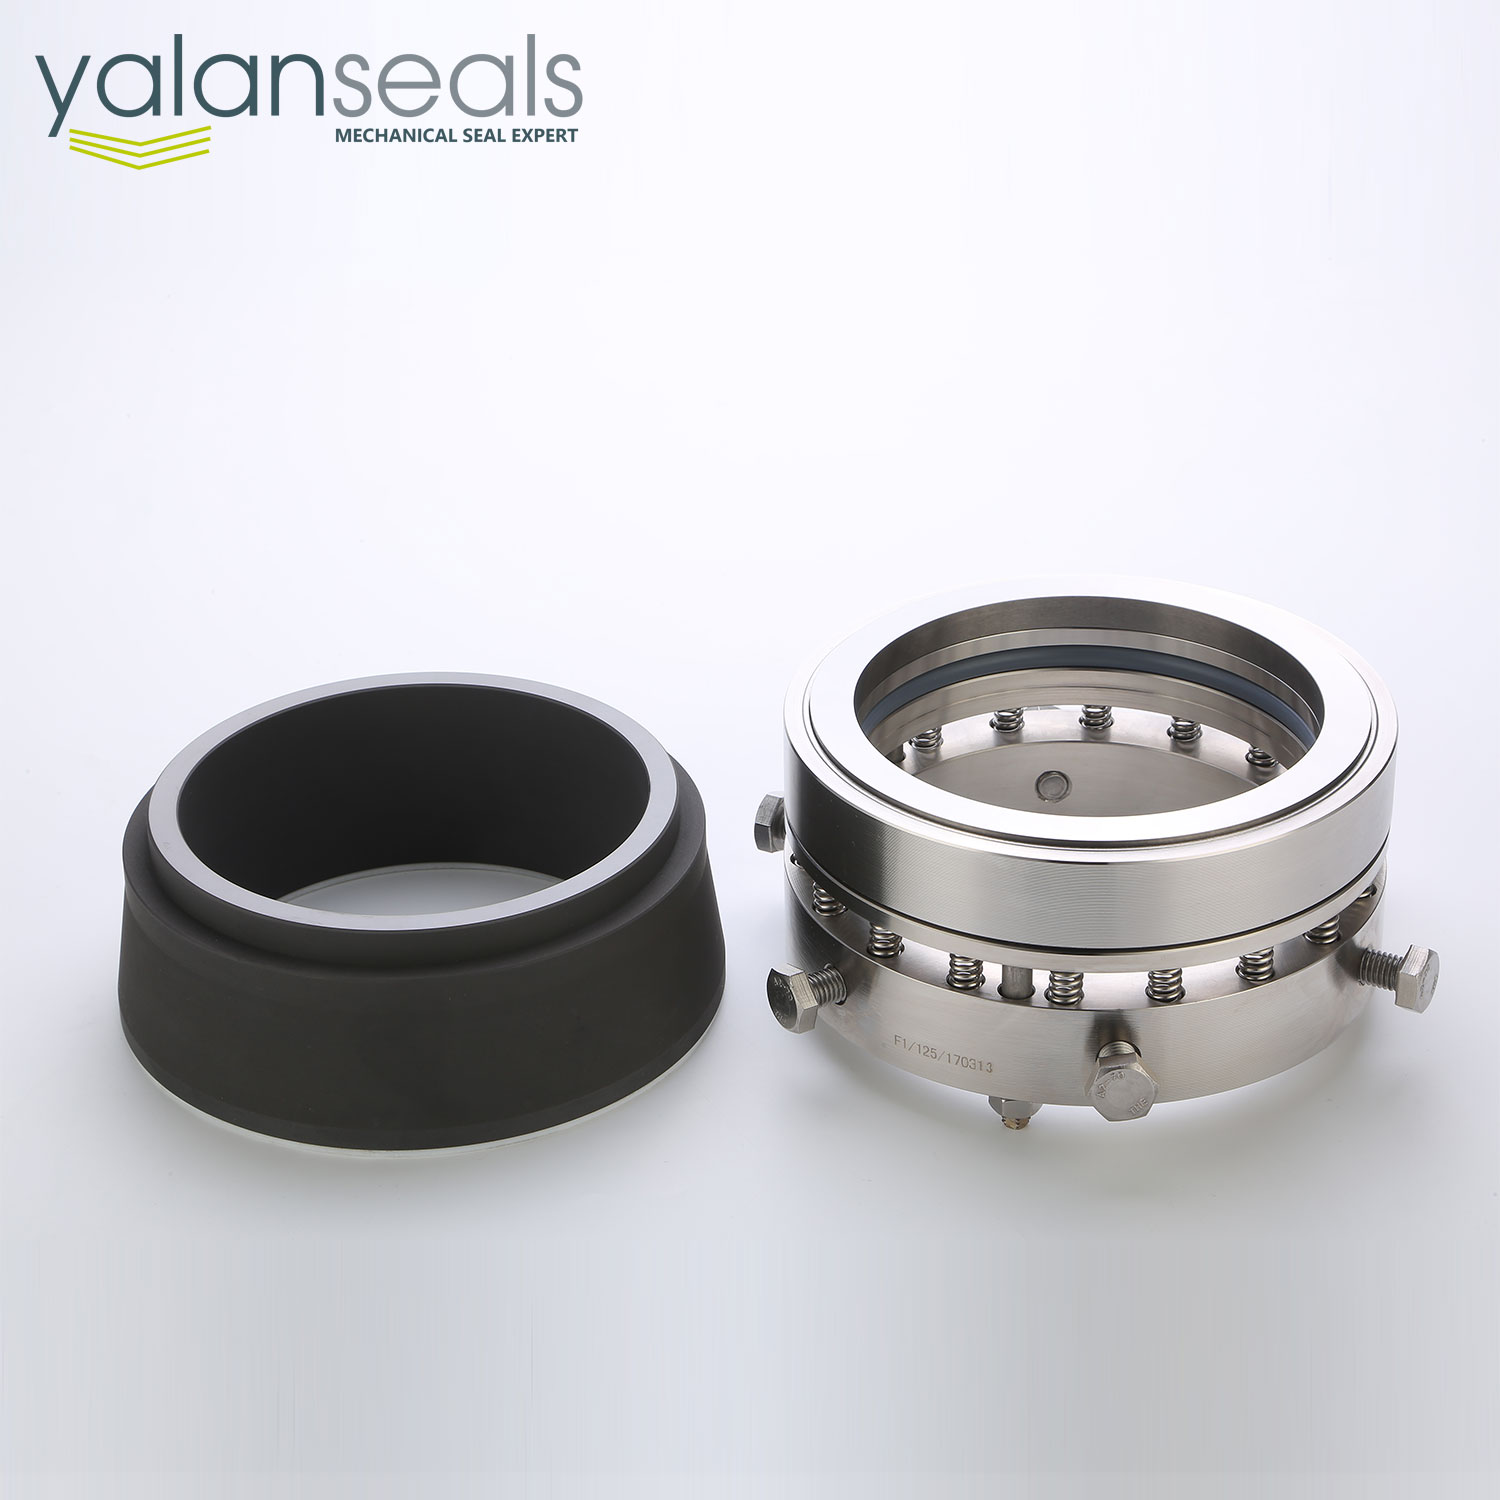 Type 202F Mechanical Seal for Mixers